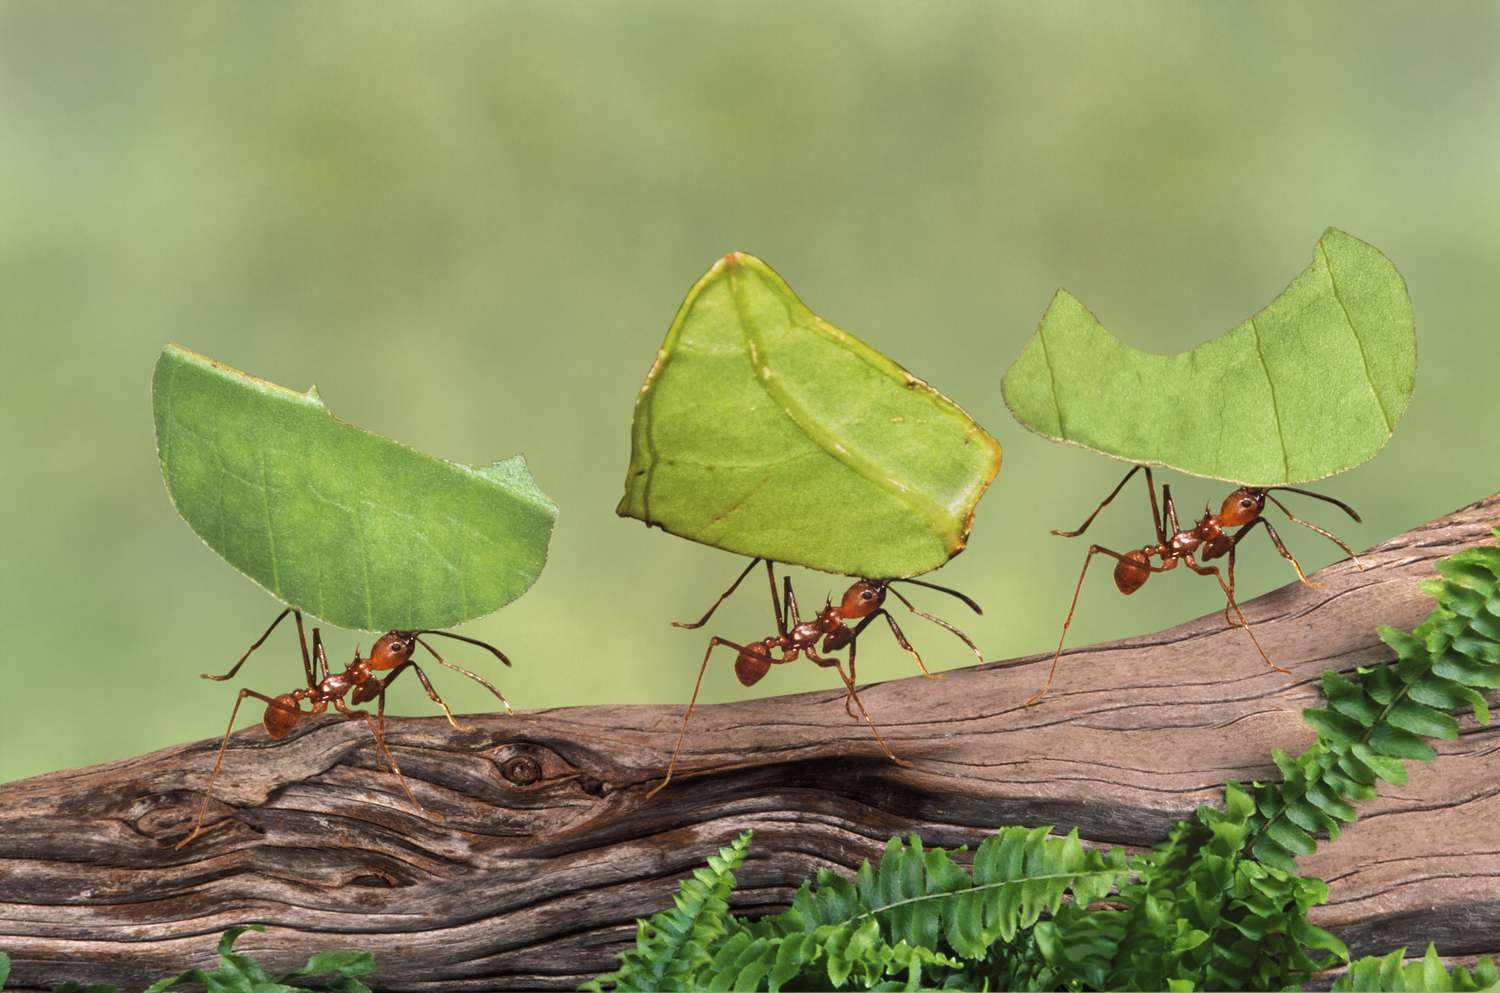 How many legs do ants have? - Discover ant anatomy